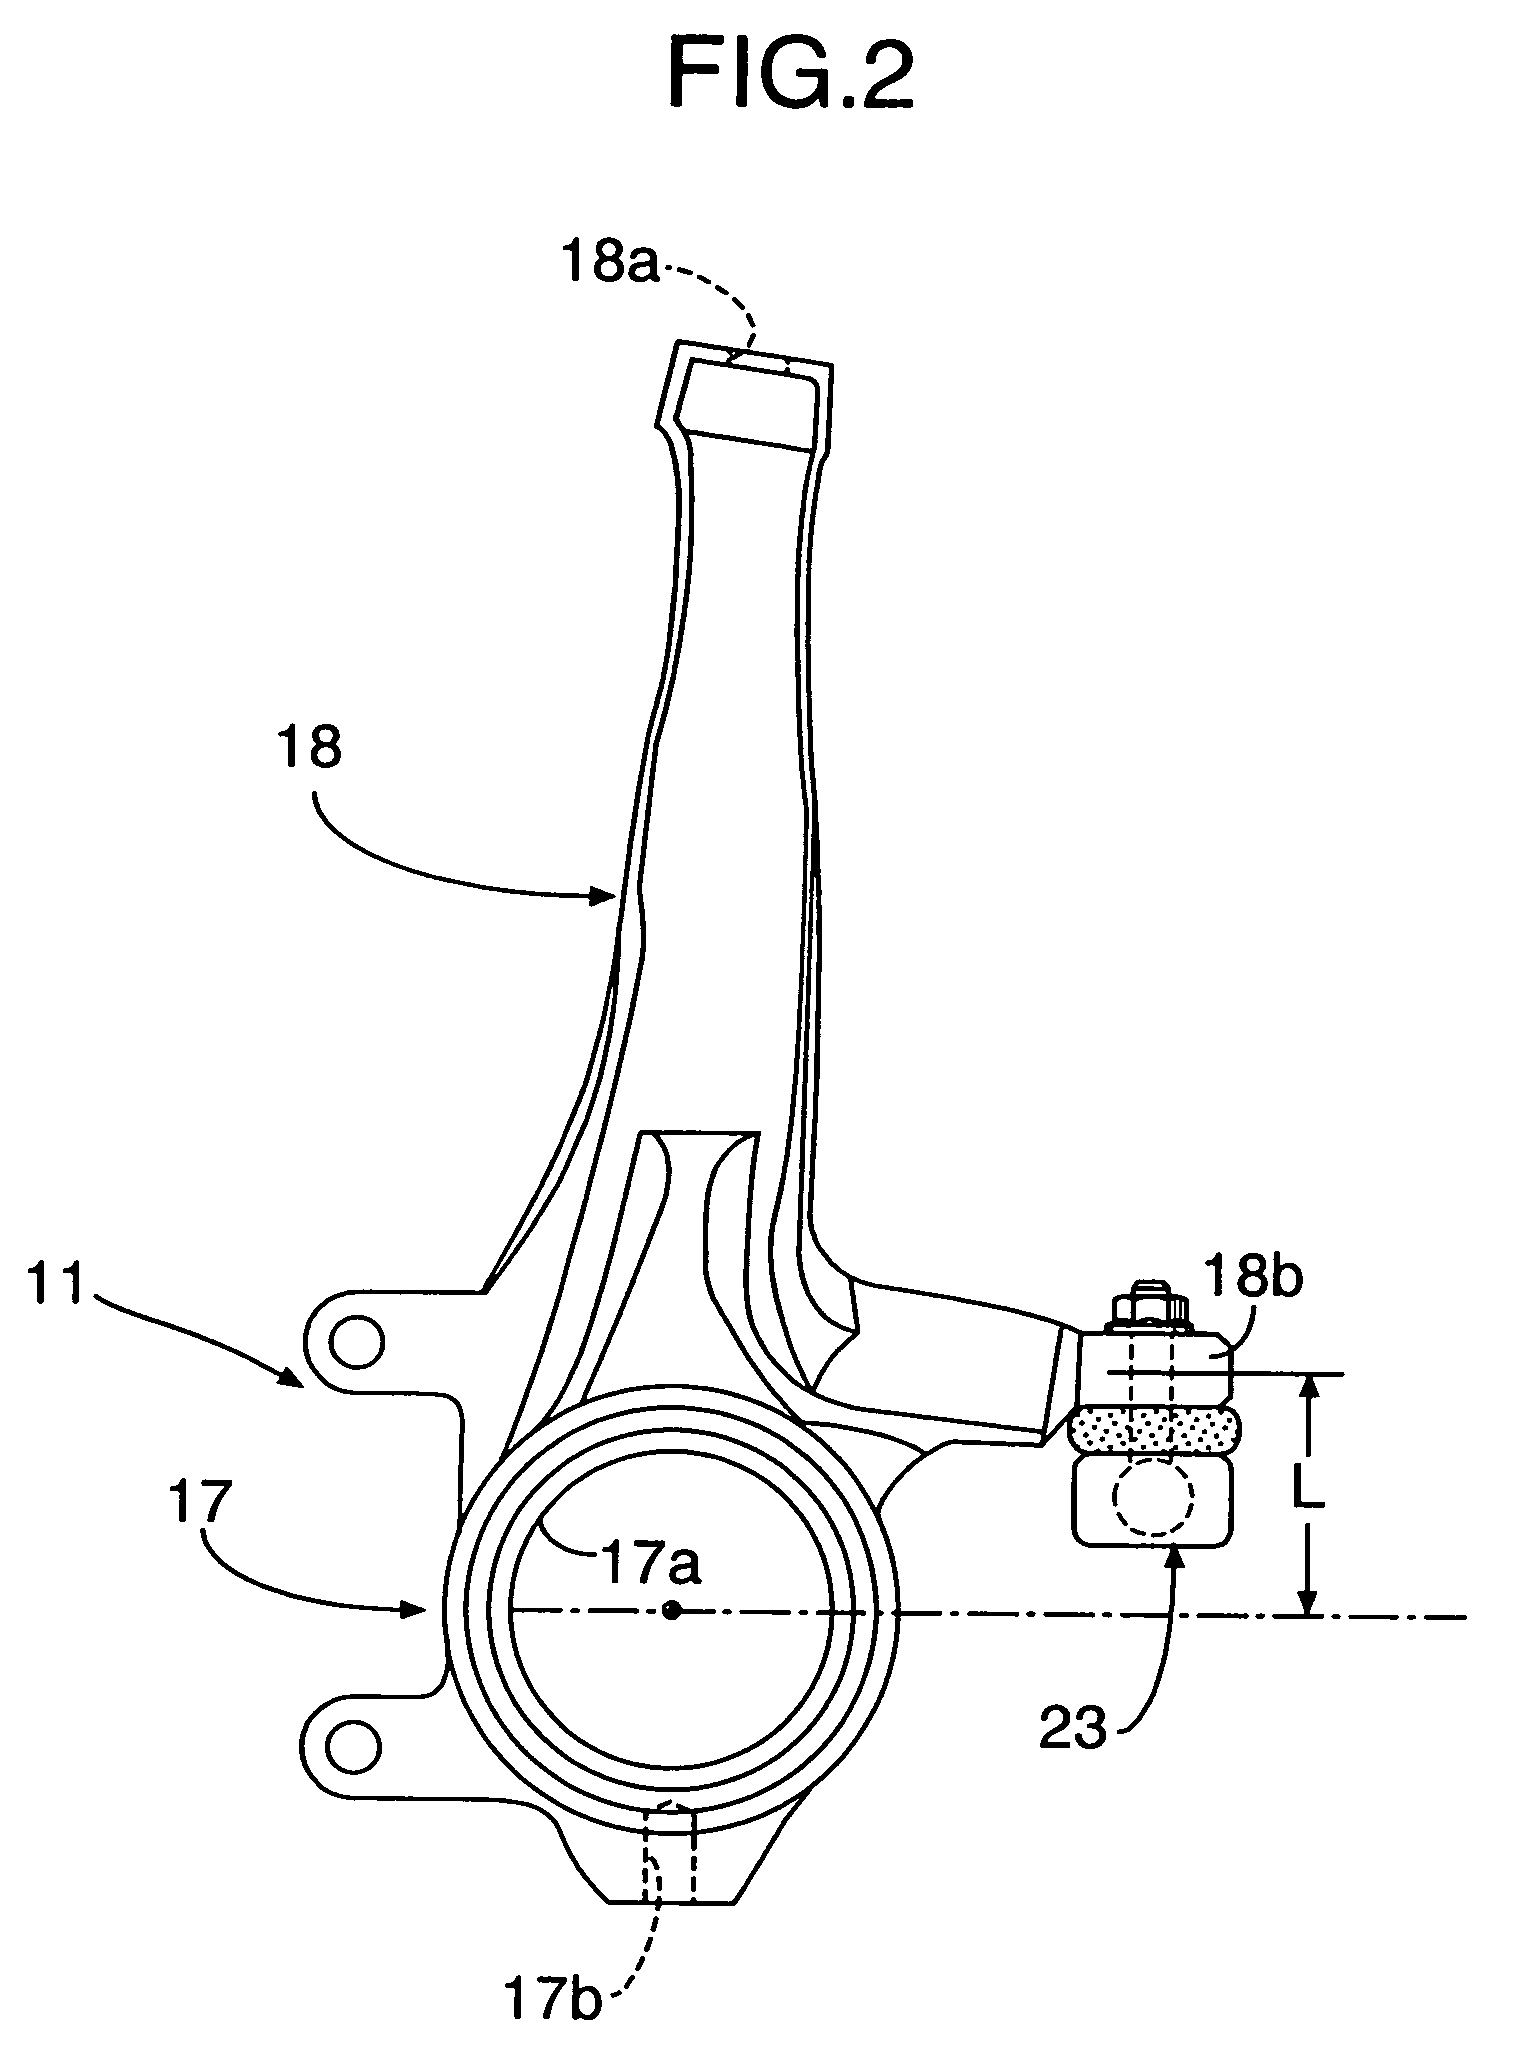 High-mounted double wishbone suspension device